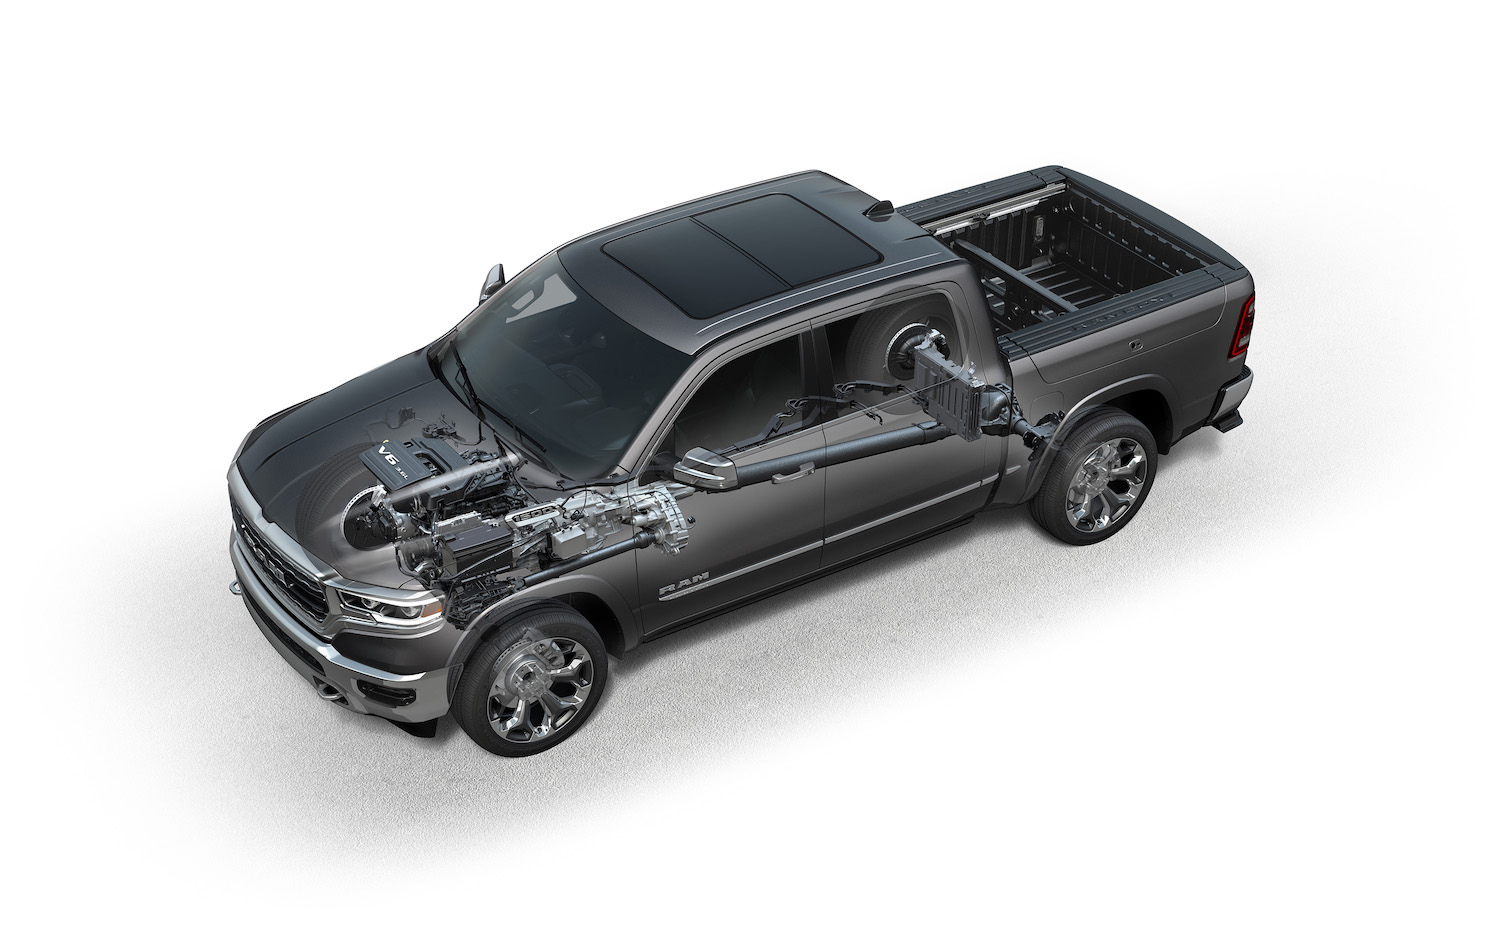 A cutaway of a 2022 Ram 1500 pickup truck with its eTorque mild hybrid components visible.